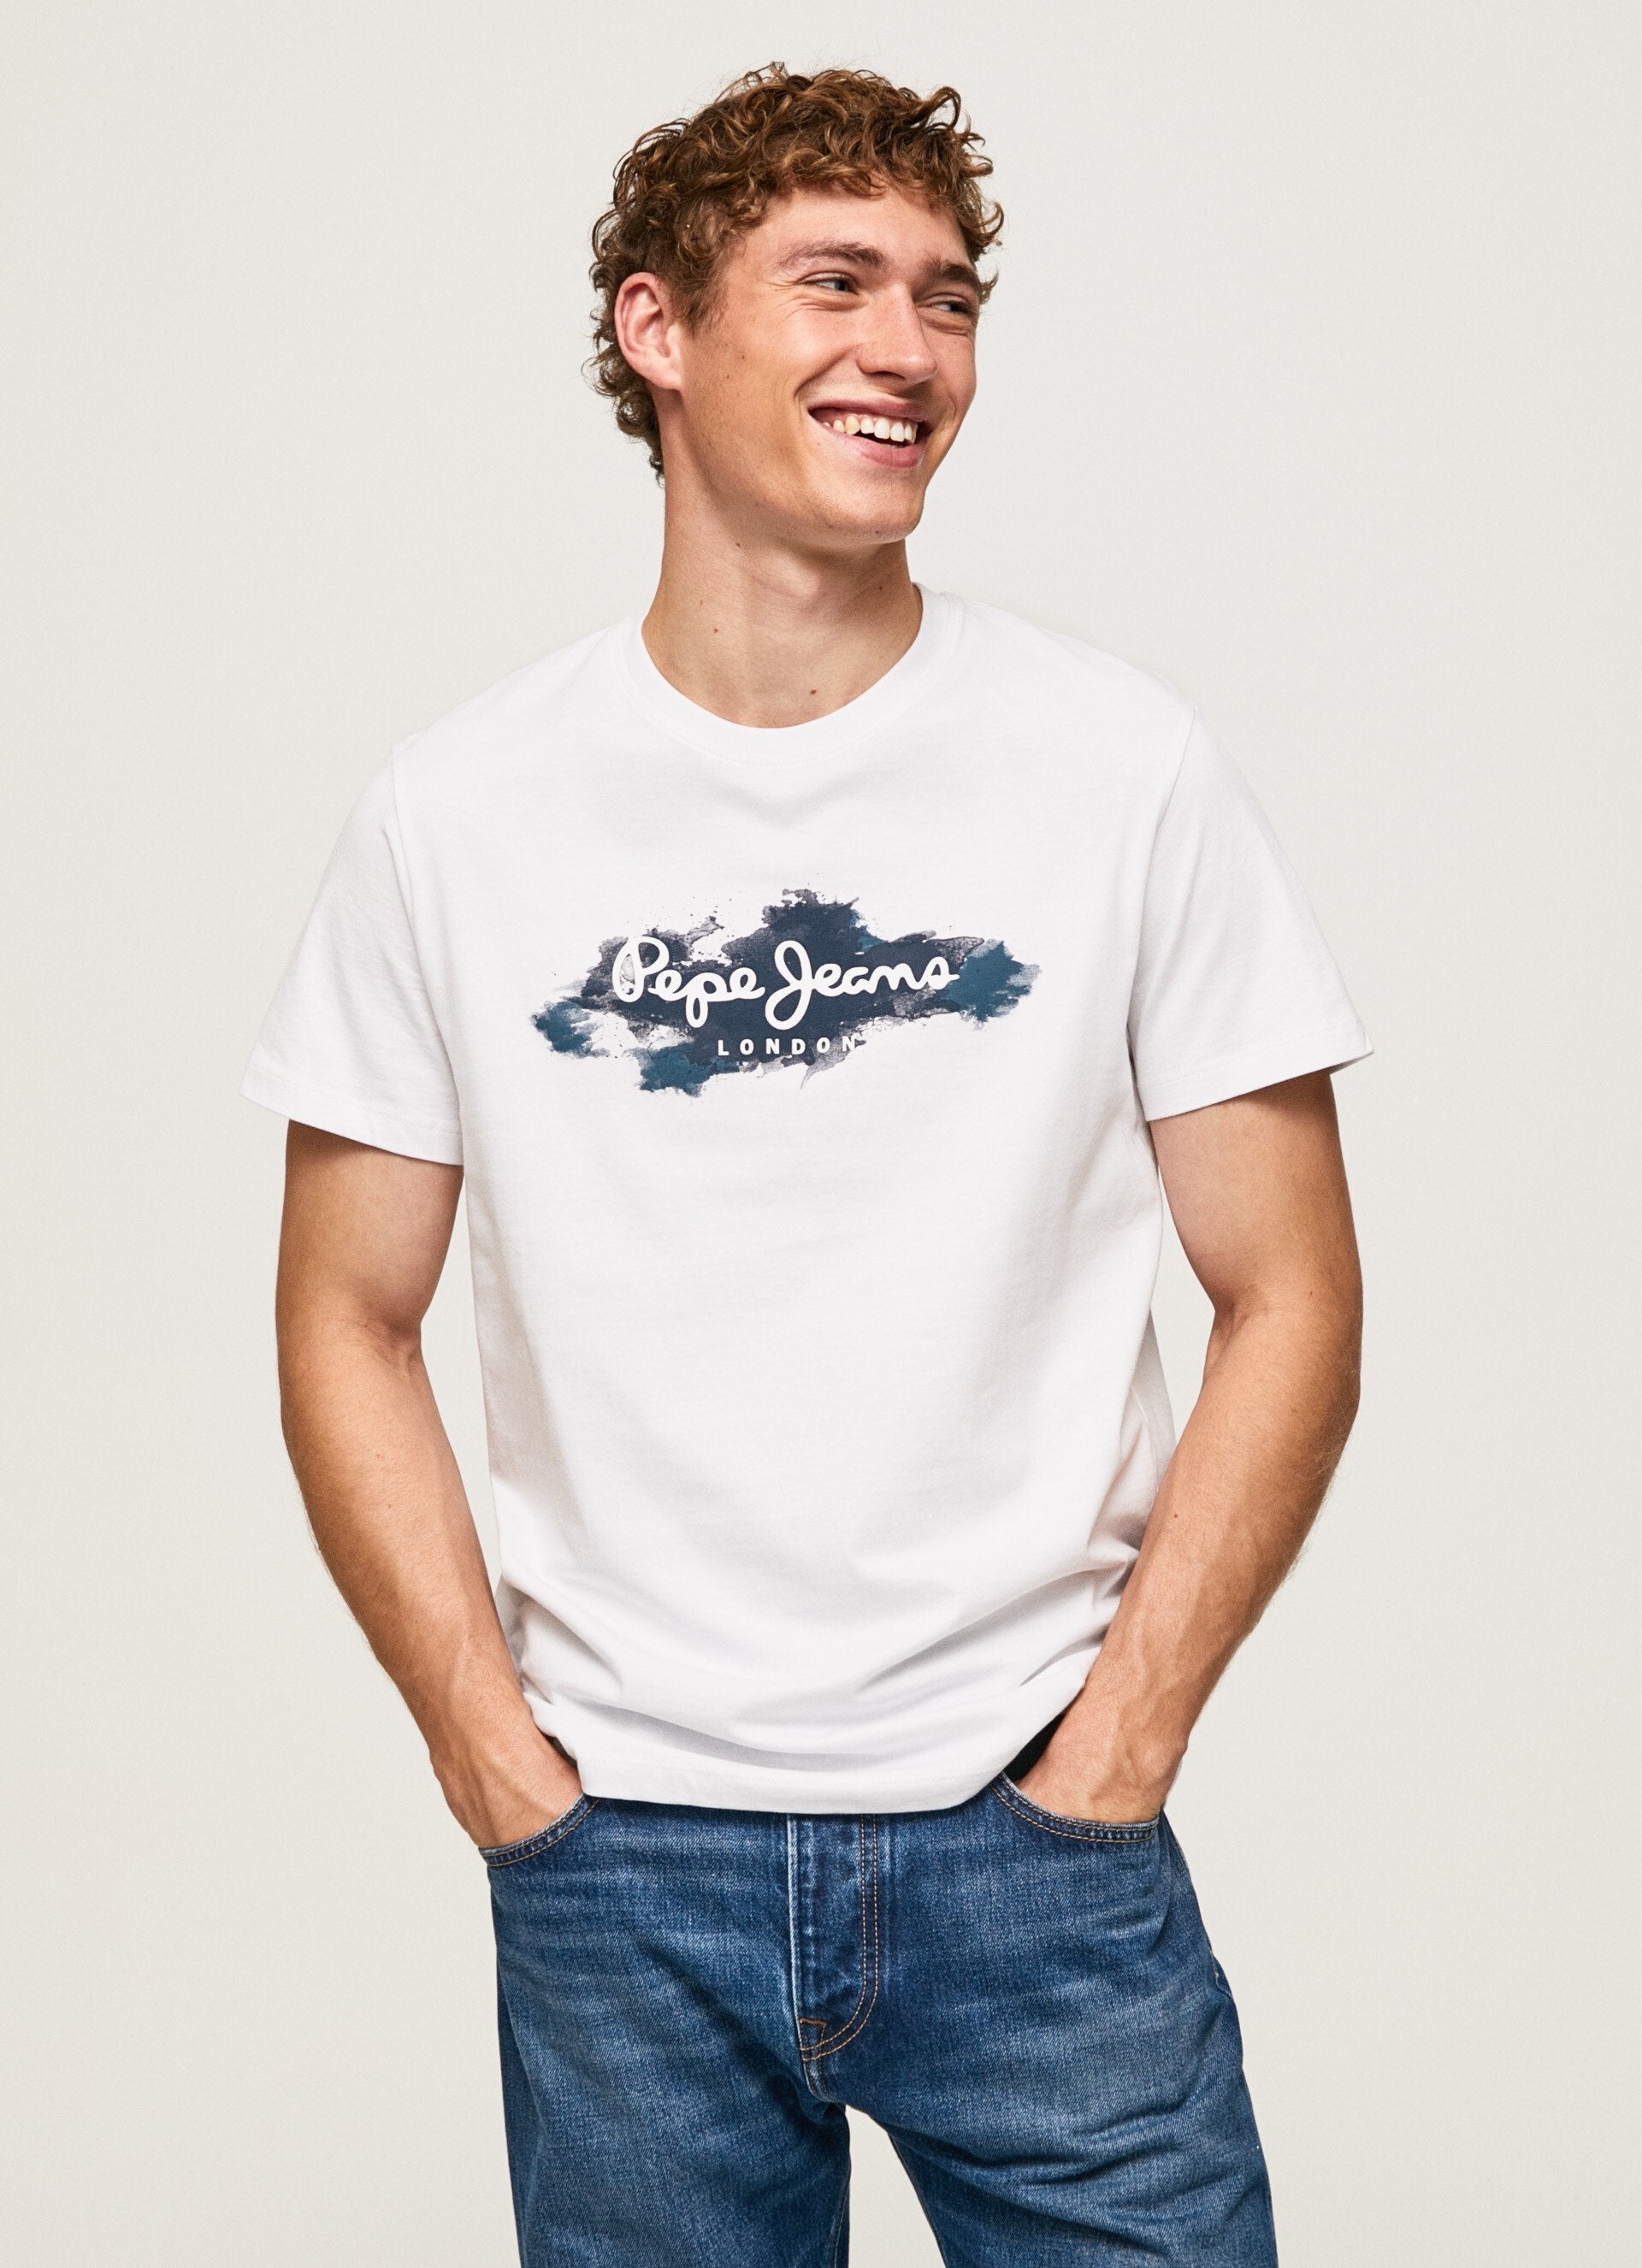 PEPE JEANS LONDON OLDWIVE REGULAR FIT T-SHIRT WHITE 